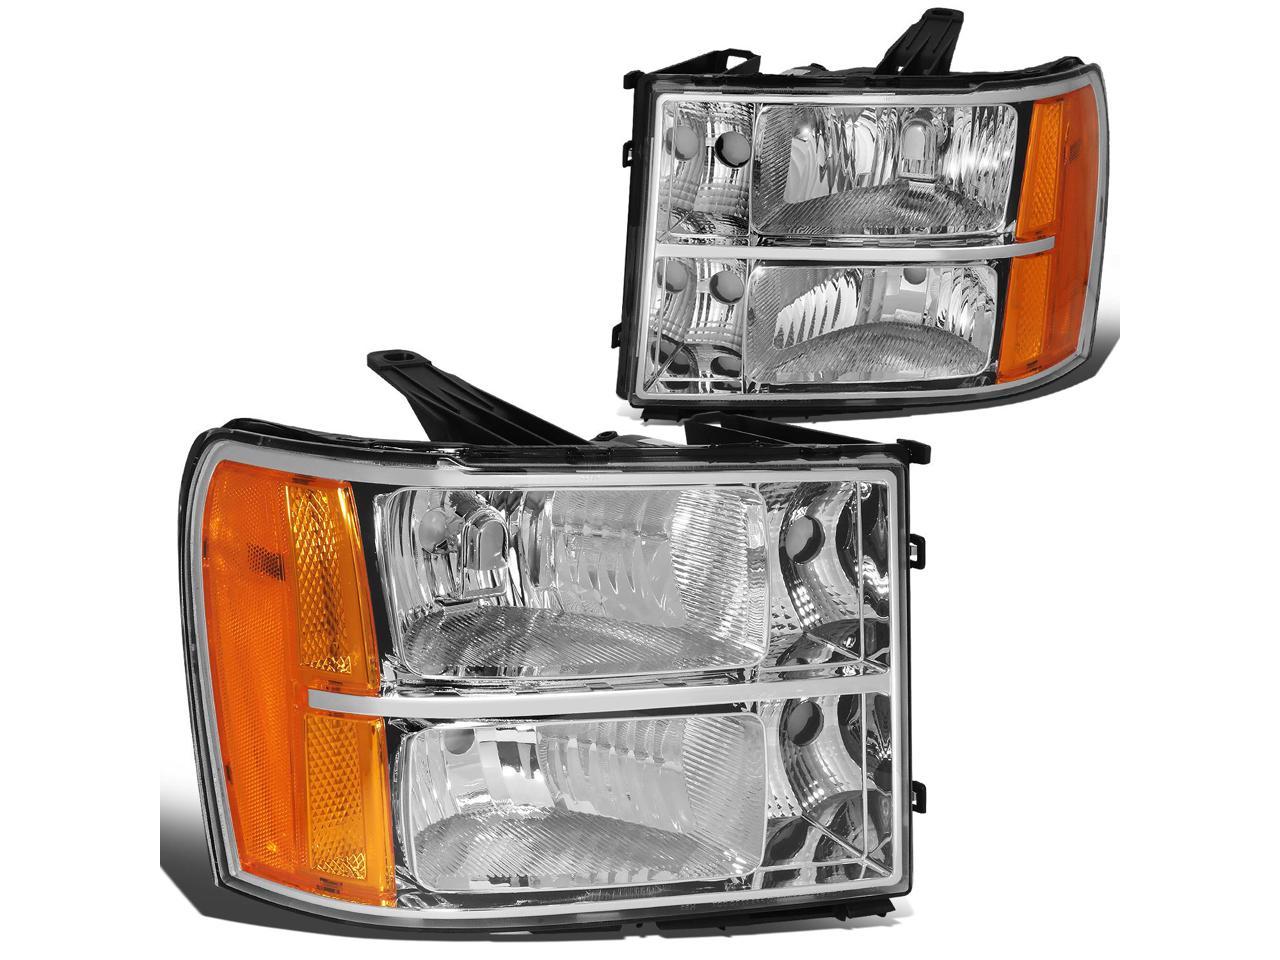 DNA Motoring HL-OH-GMCSIE07-BK-AM Black Amber Headlights Replacement For 07-13 Sierra 